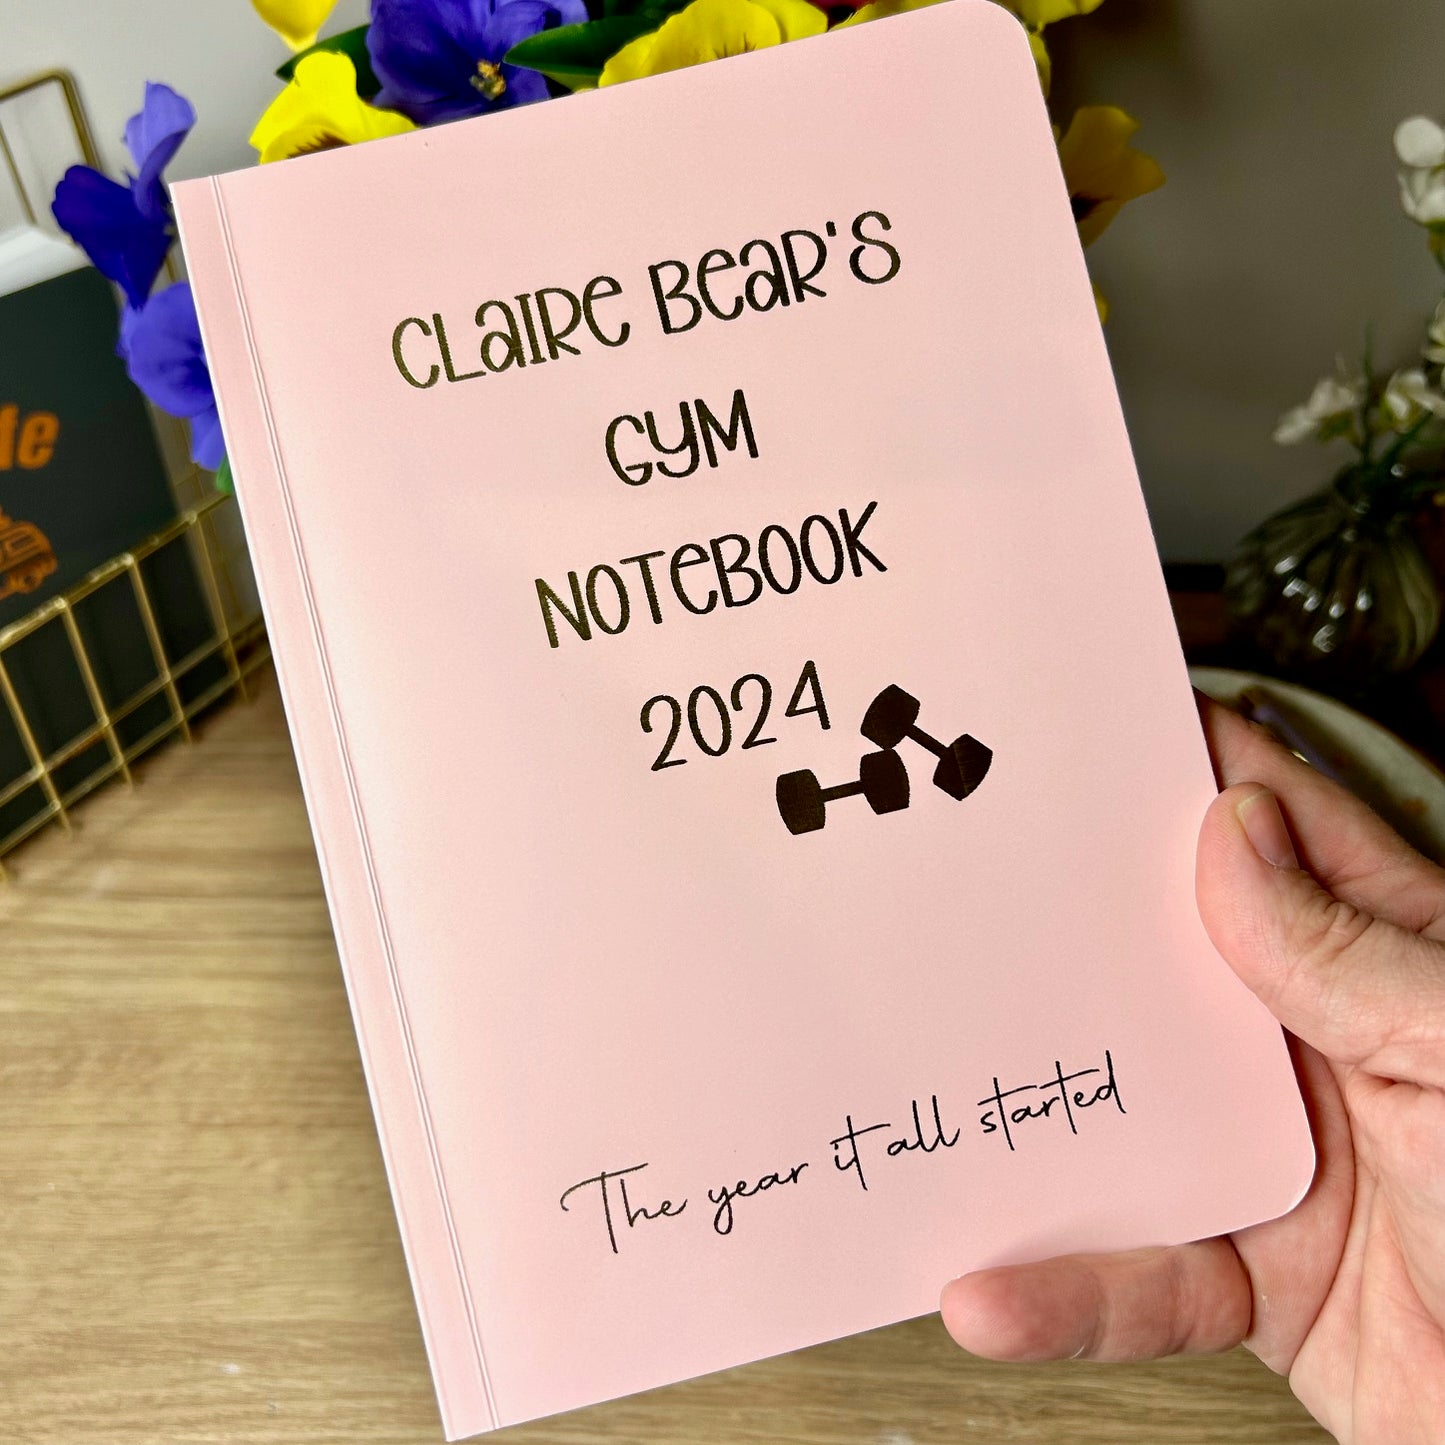 A Poweder pink as softback notebook that says 'Claire bears gym notebook 2024' in gold foil